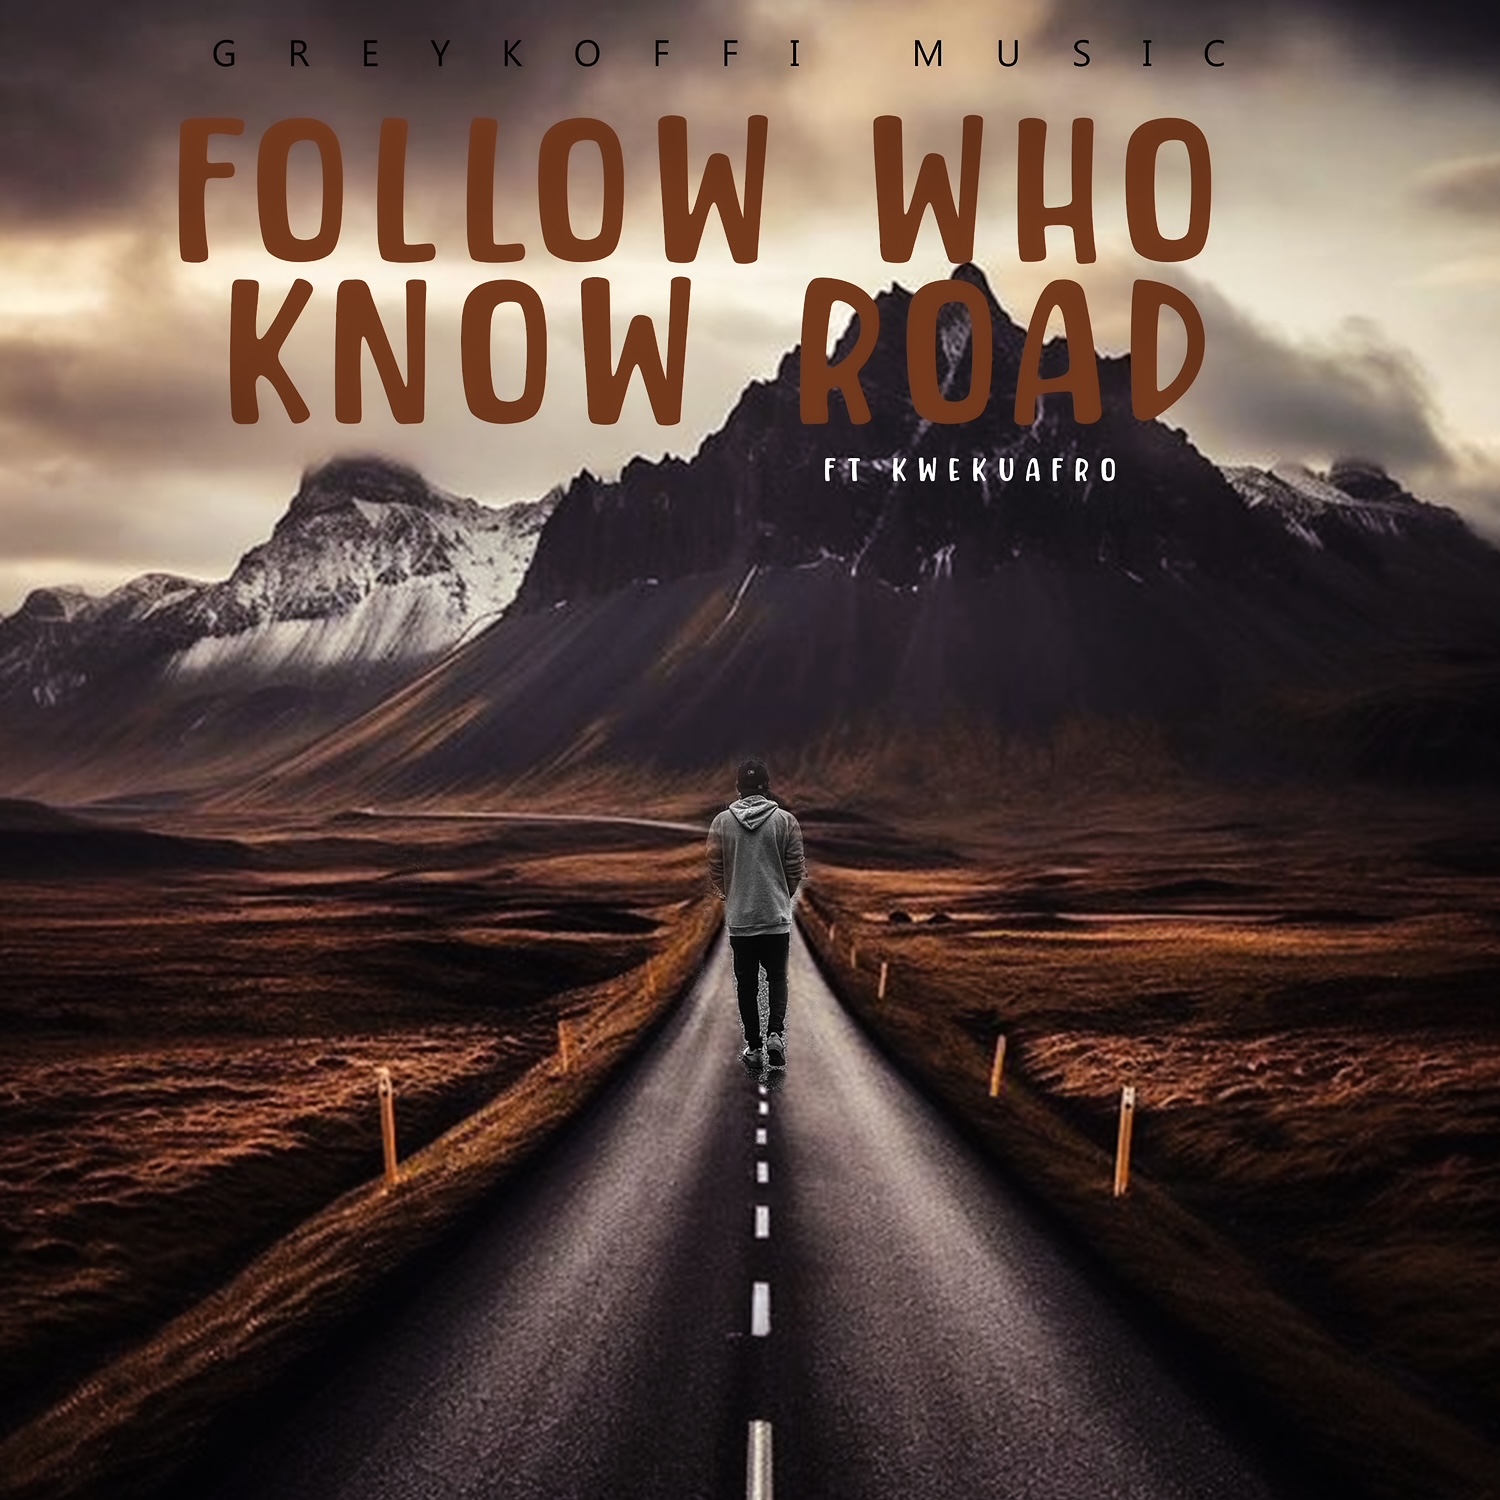 Greykoffi drops new urban Christian music, 'Follow Who Know Road'